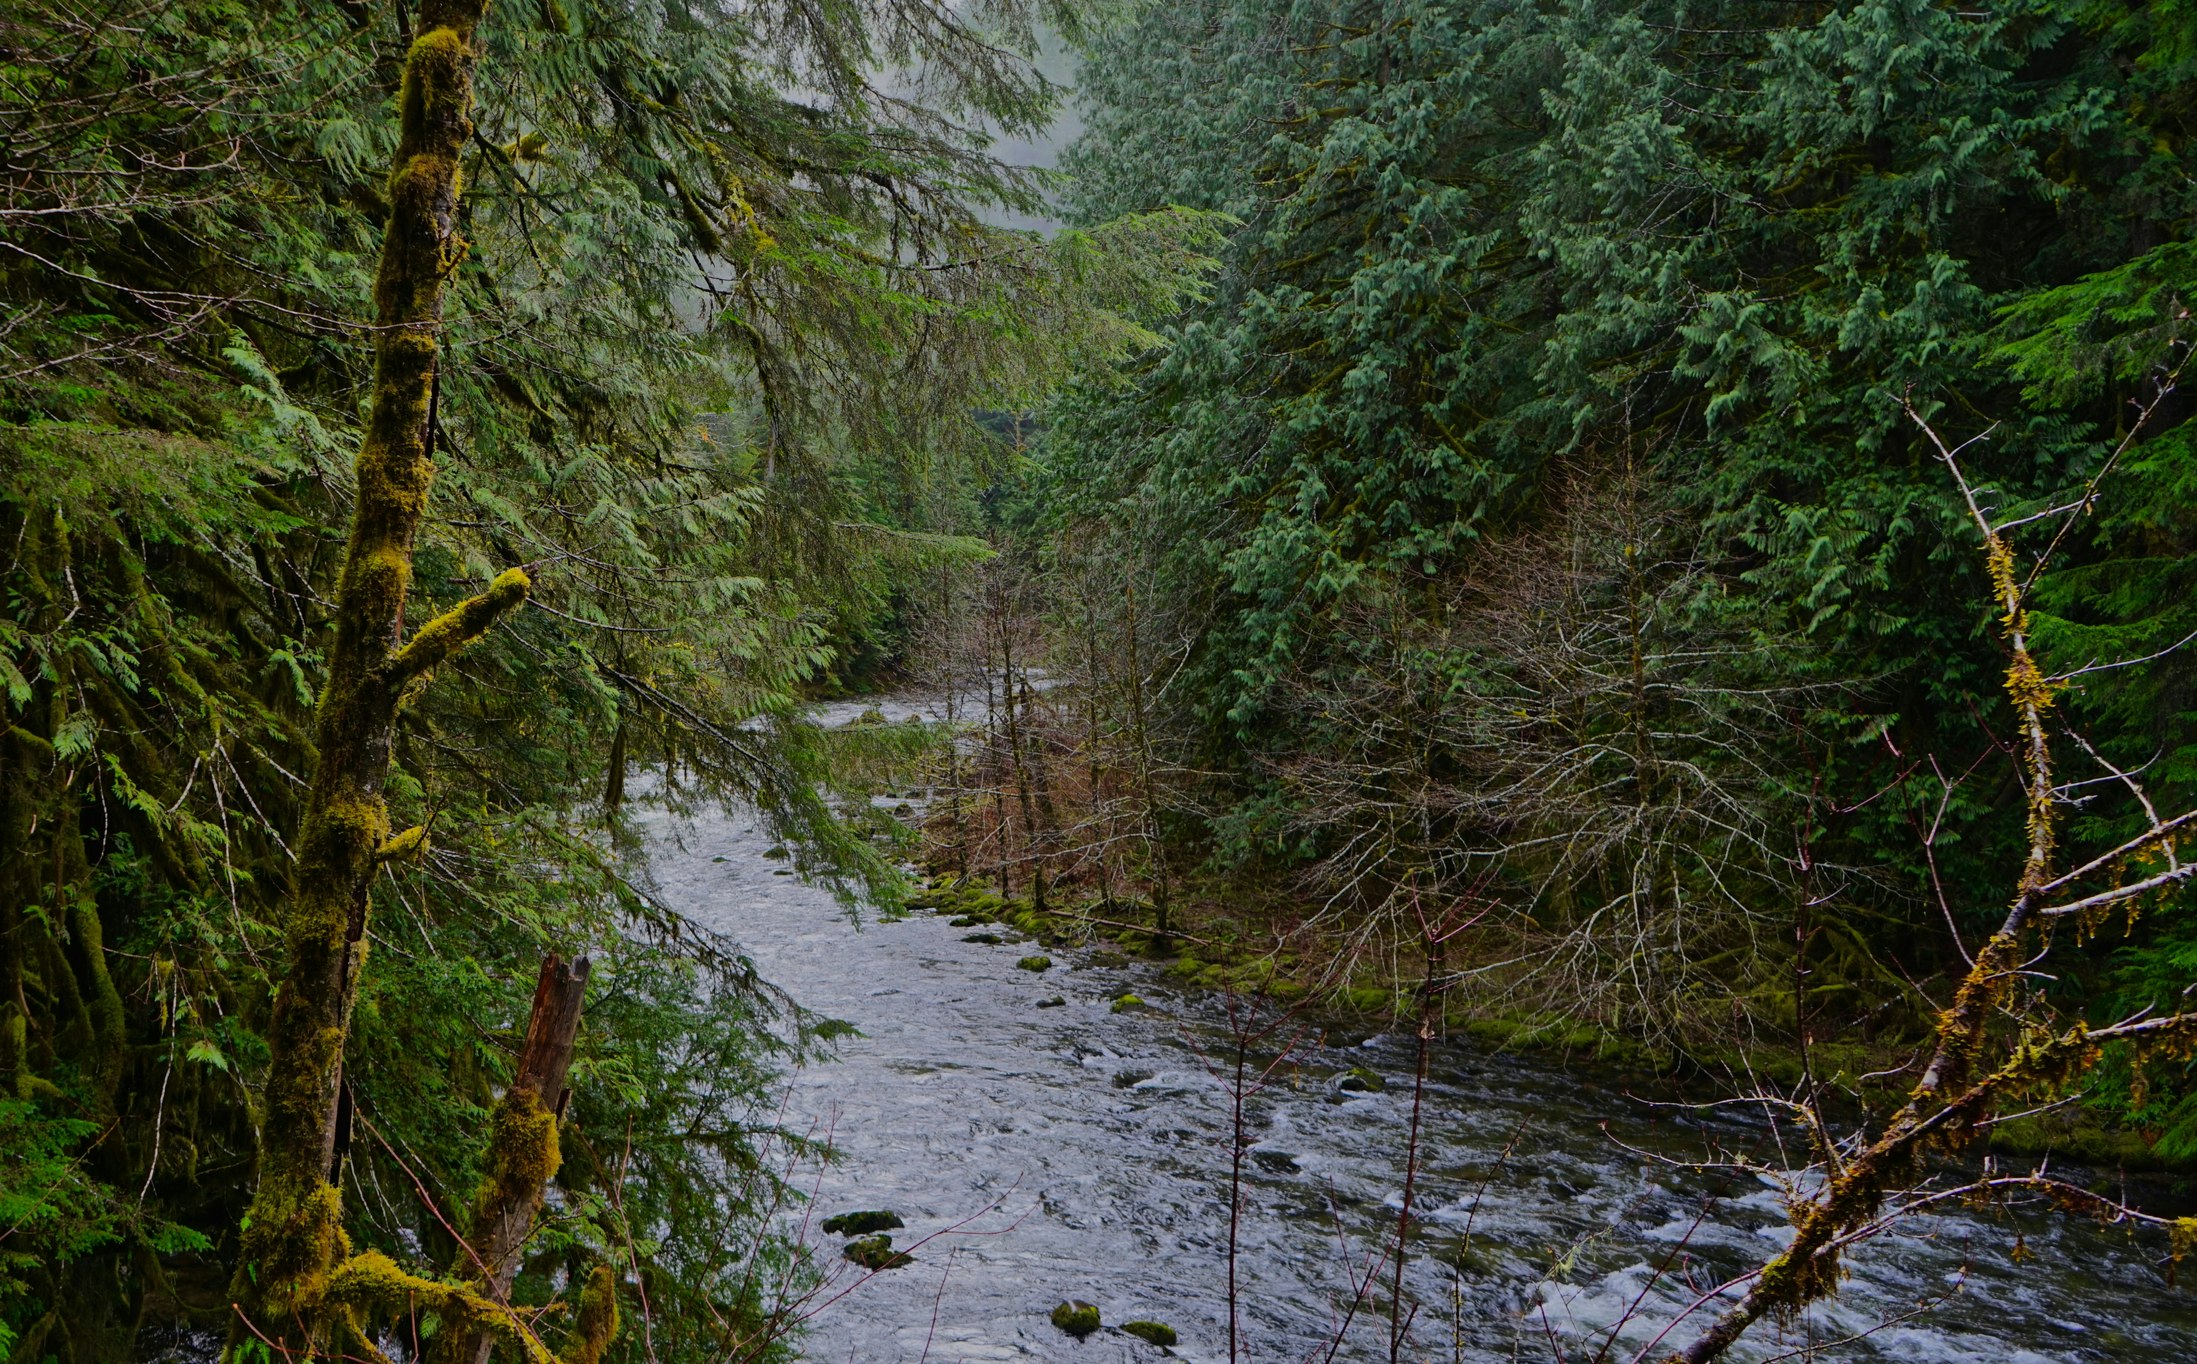 The Salmon River is a classic Pacific Northwest river surrounded by thick evergreen foliage and moss-coated spruce and fir trees growing densely around a choppy, fast-flowing and rocky river in deep blue and green colors.